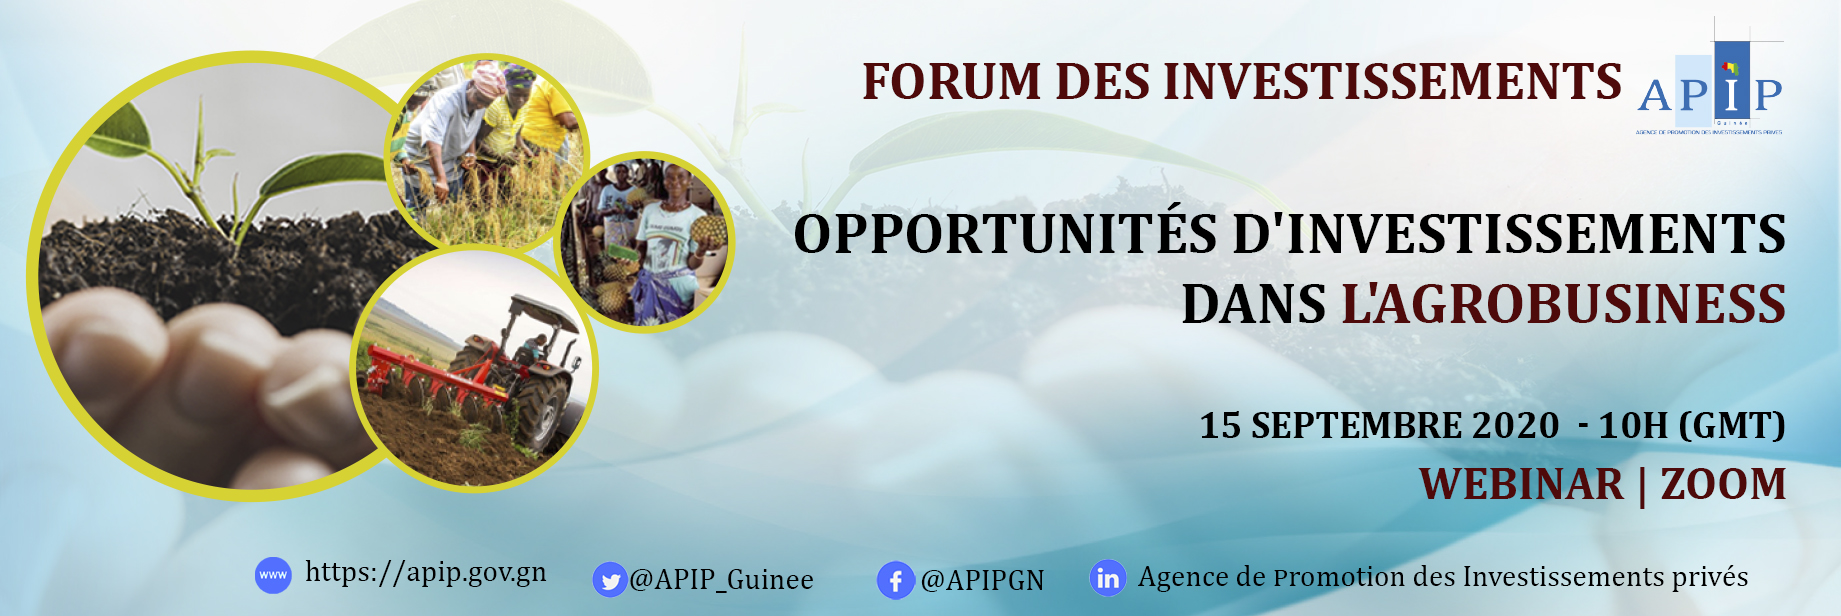 Investment Forum on AgroBusiness Investment Opportunities